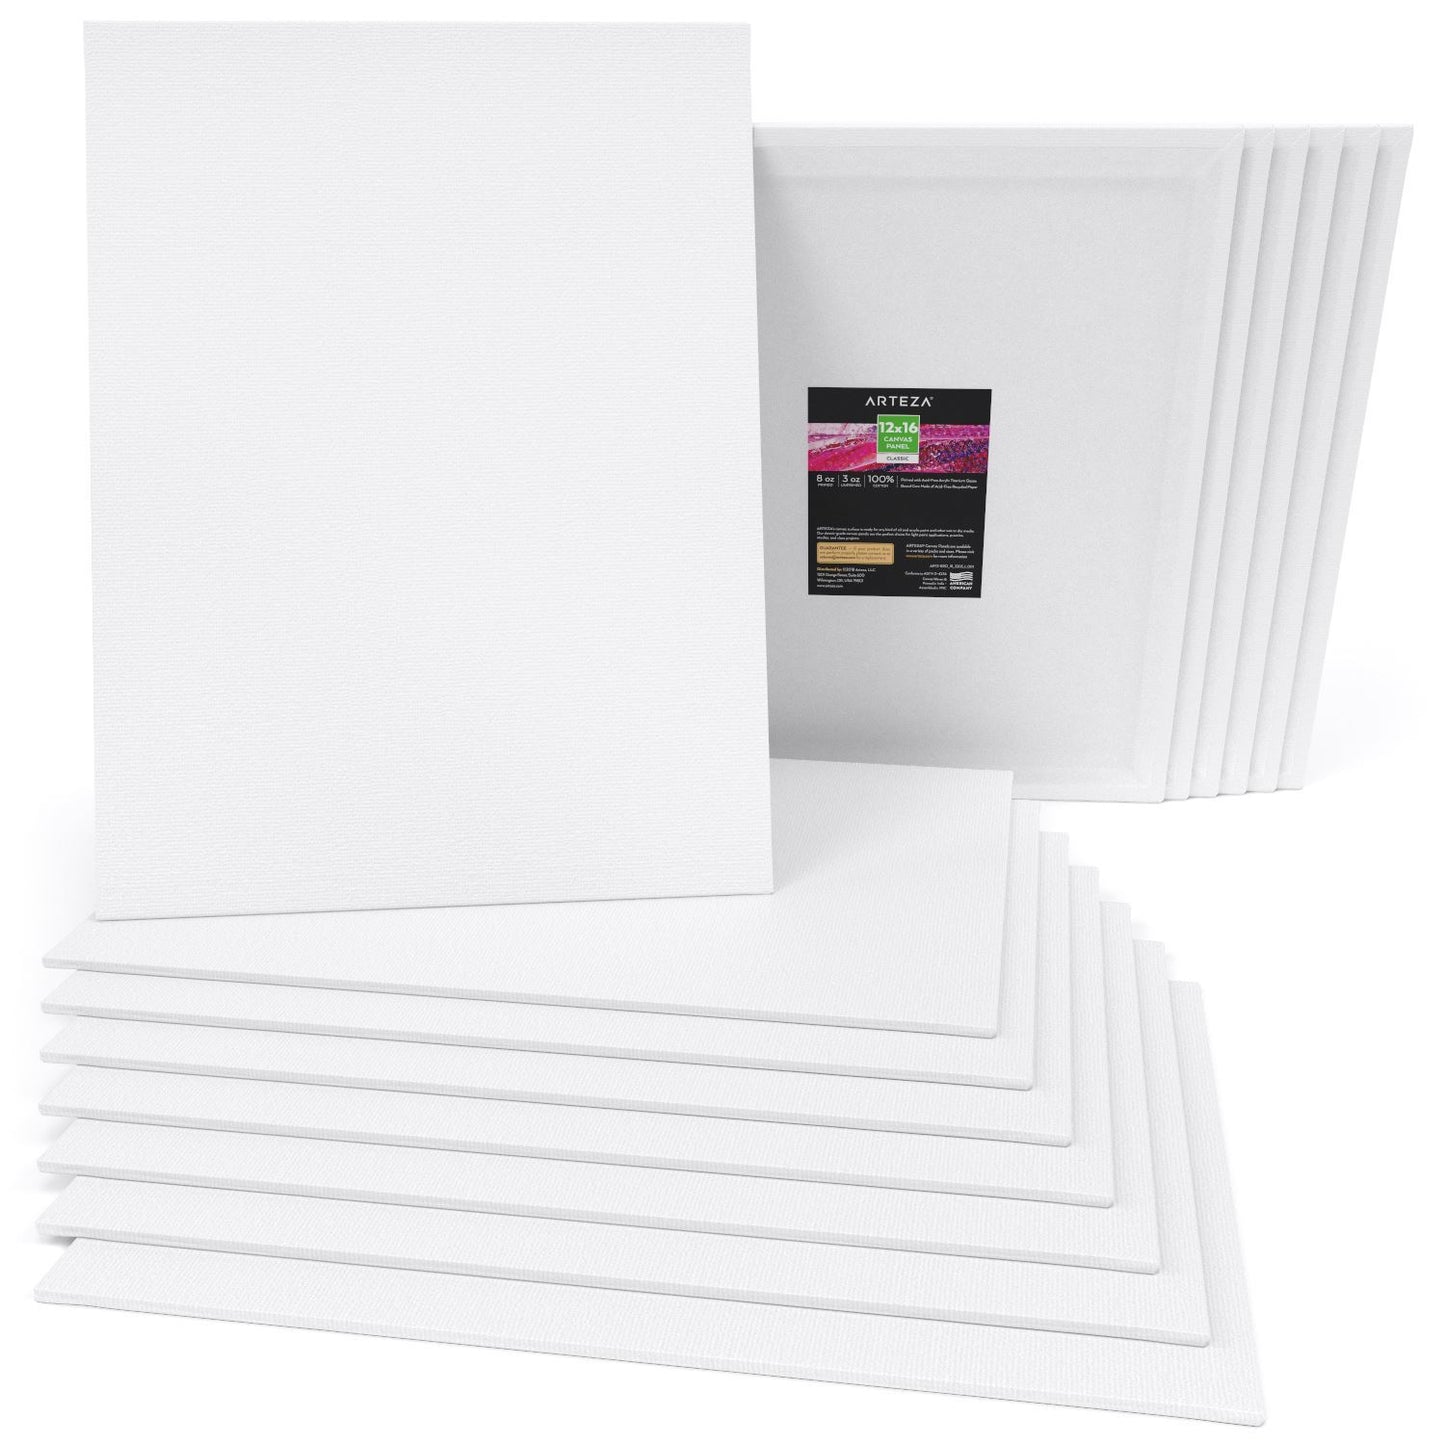 Classic Canvas Panels, 12" x 16" - Pack of 14